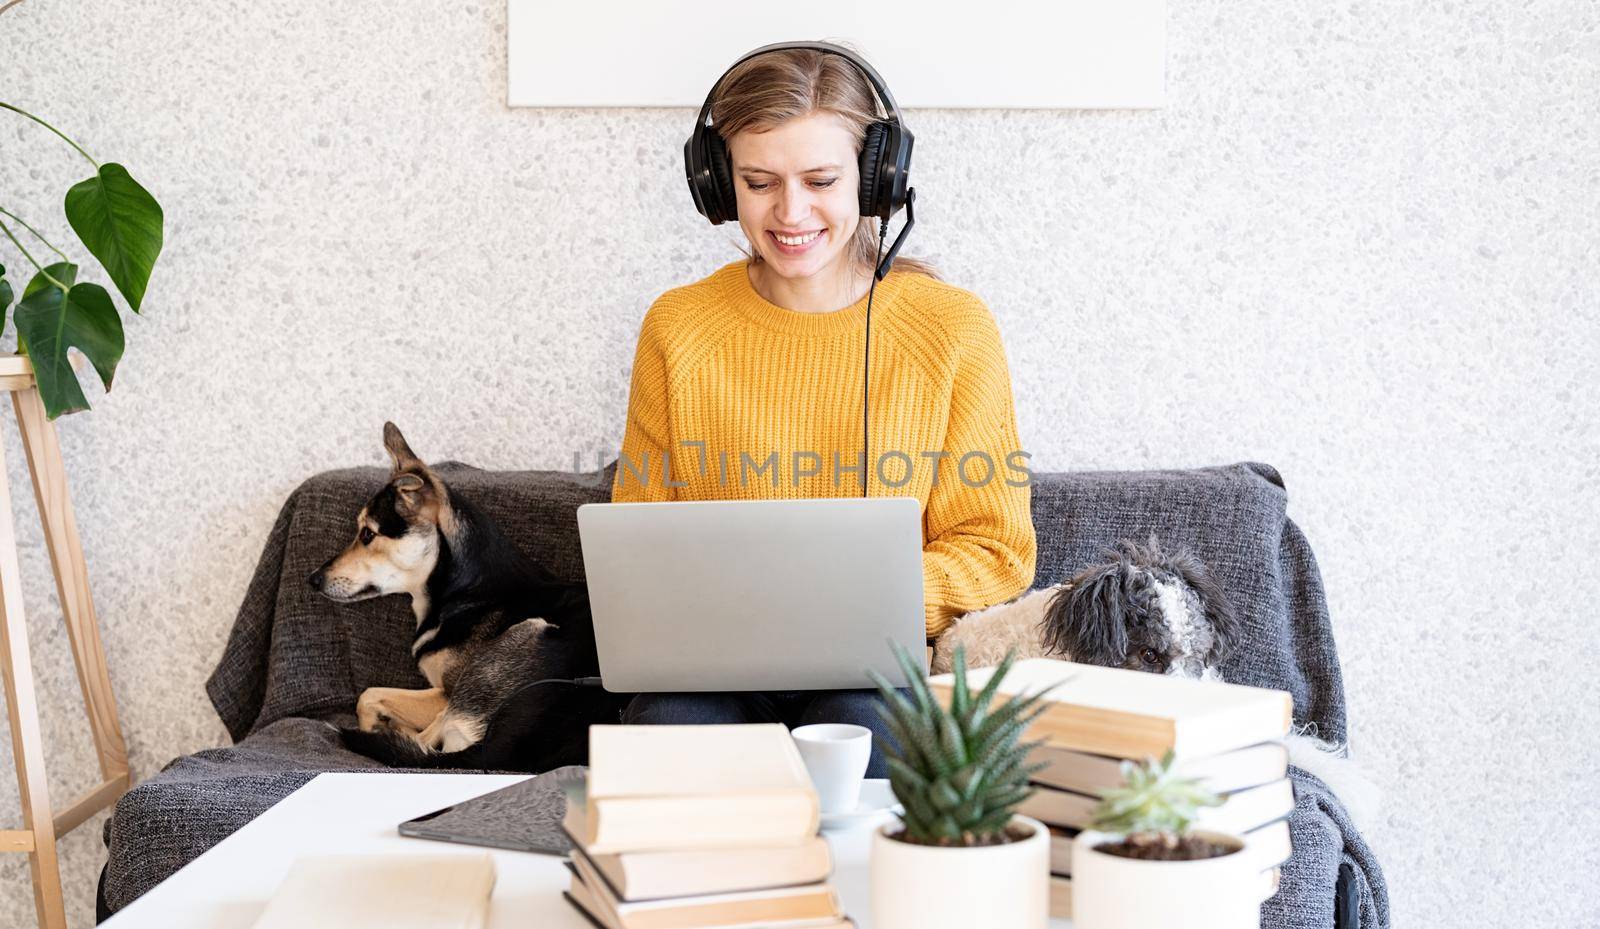 Distance learning. E-learning. Young smiling woman in yellow sweater and black headphones studying online using laptop, sitting on the couch at home